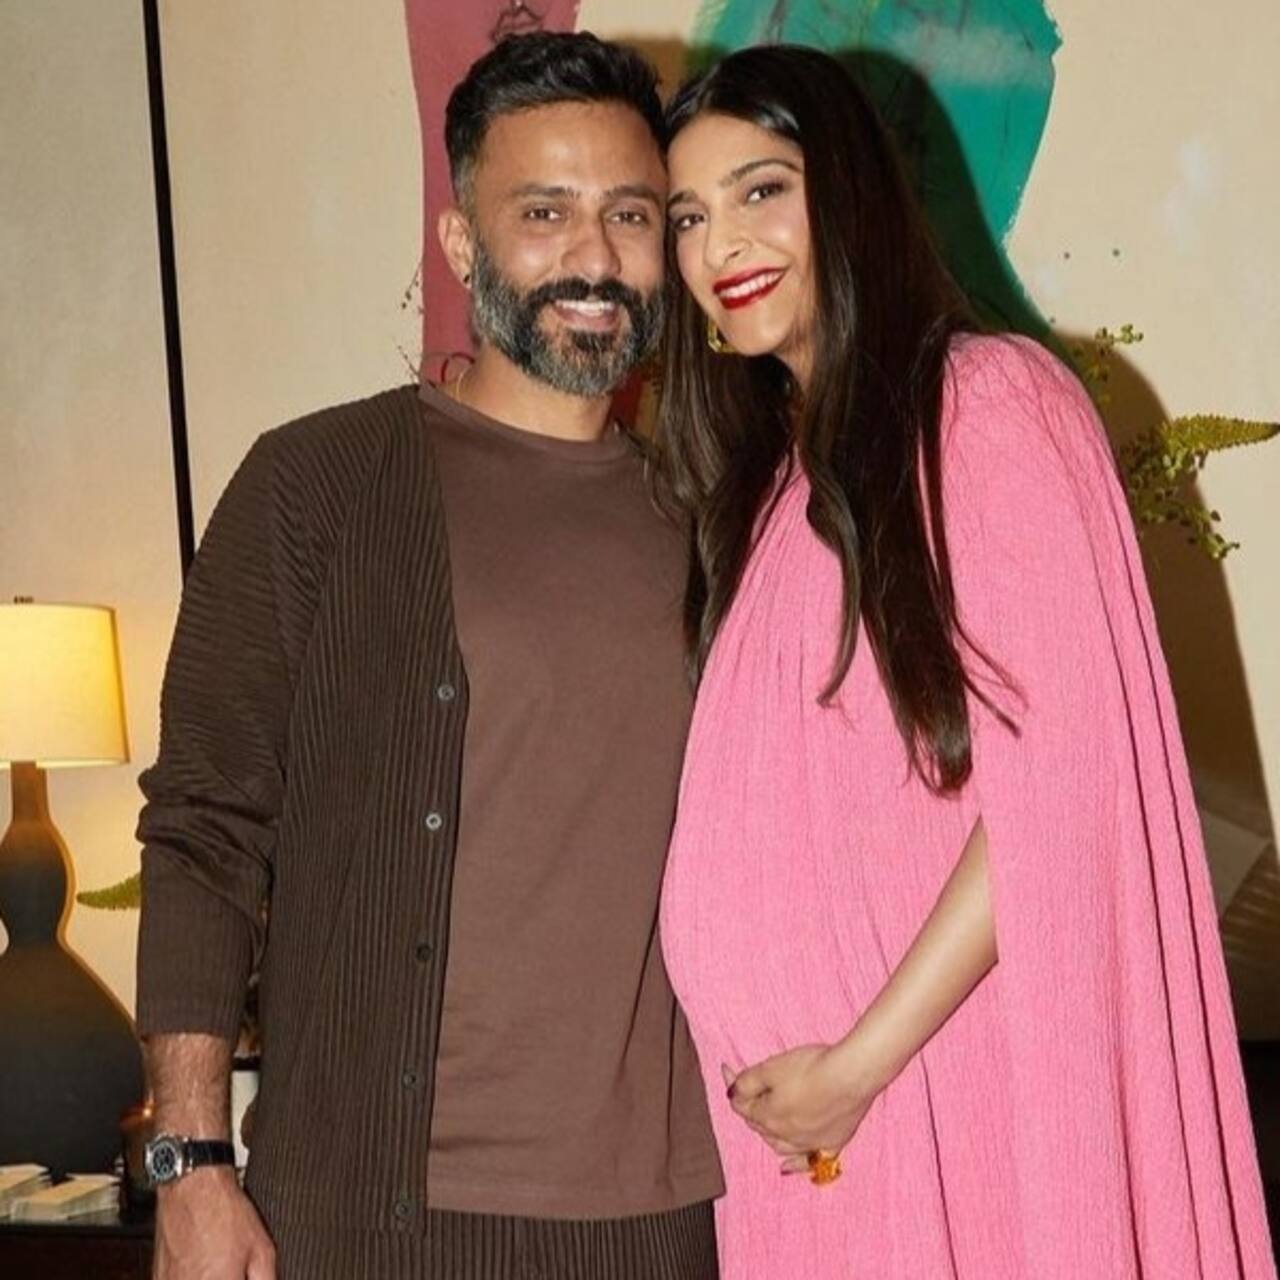 Sonam Kapoor and Anand Ahuja planning a lavish 'meet the baby' and naming ceremony for their son? [EXCLUSIVE]